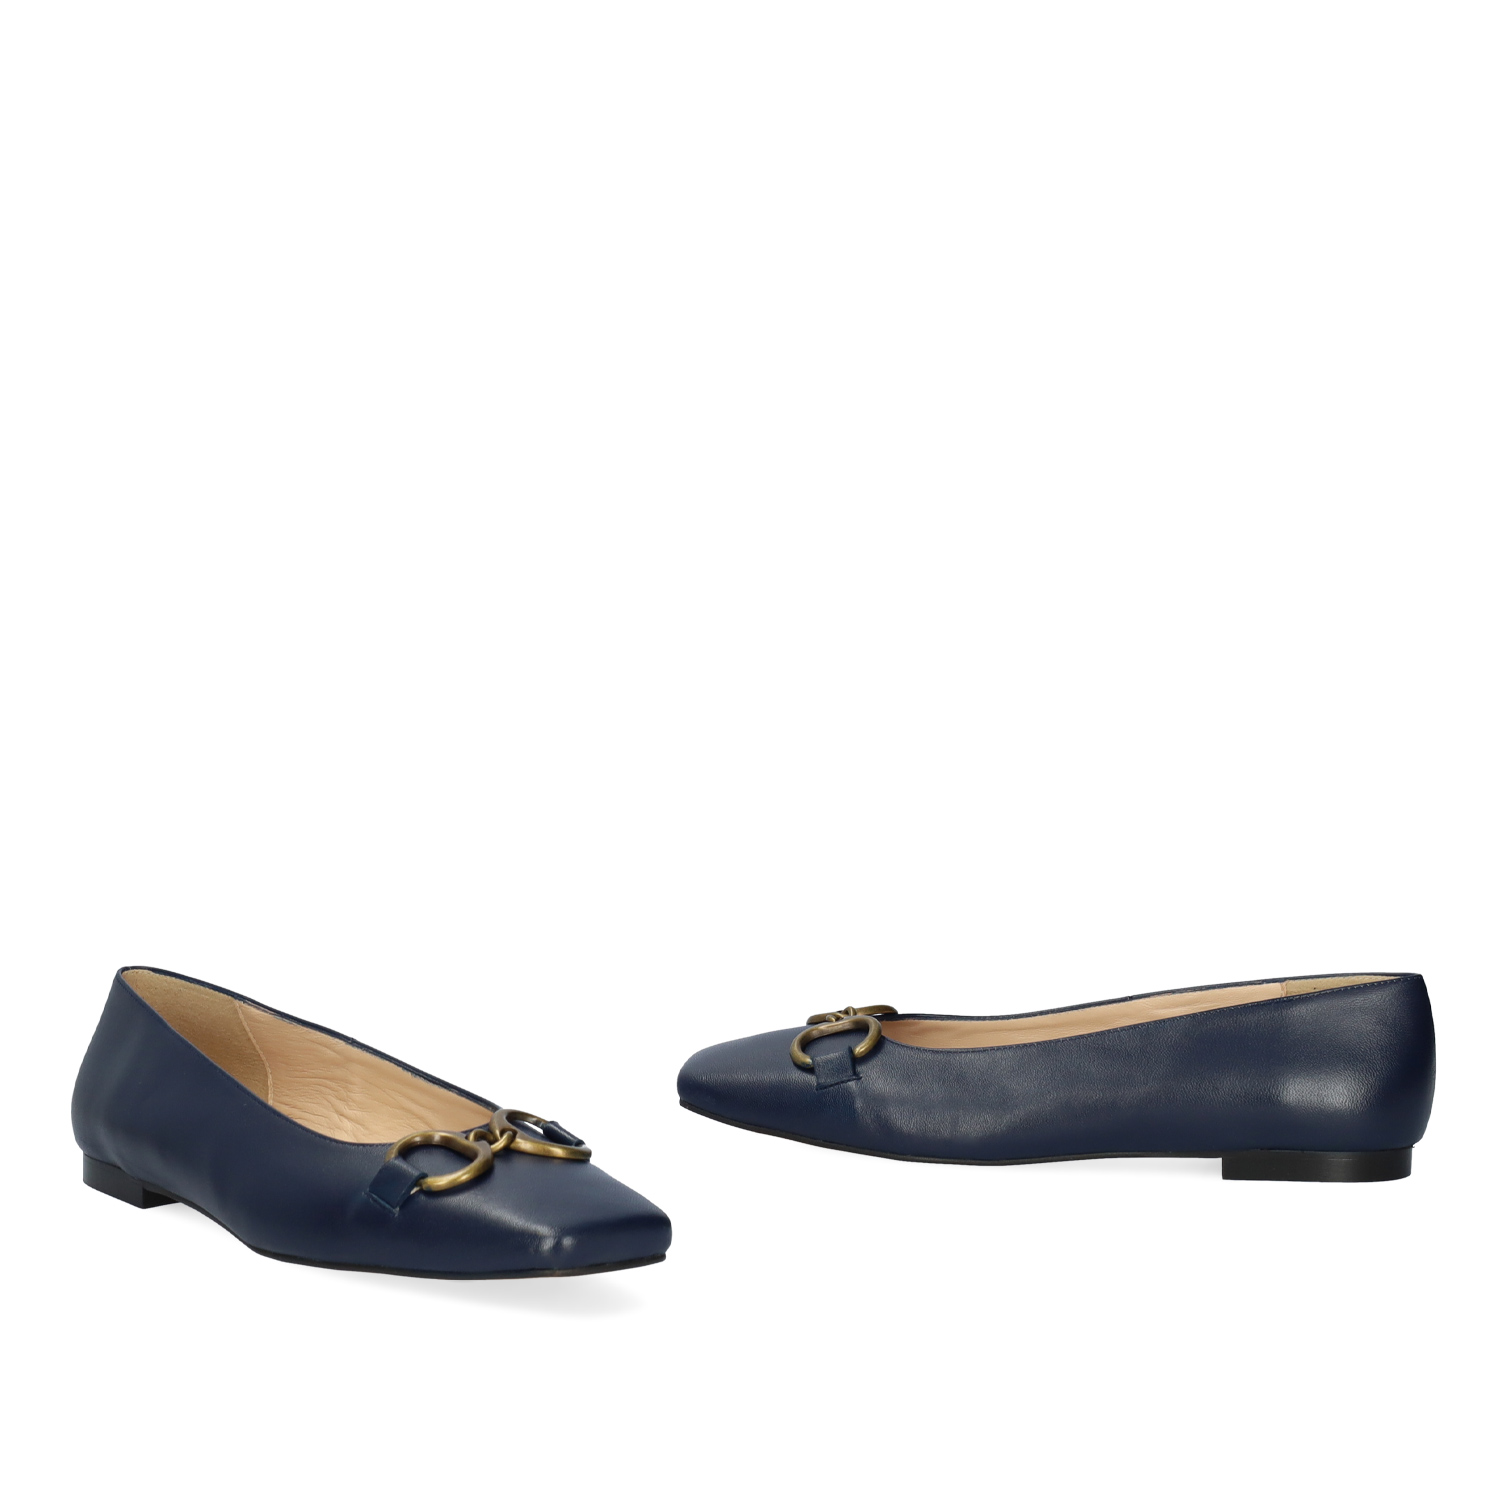 Square toe ballerina flats in navy leather 